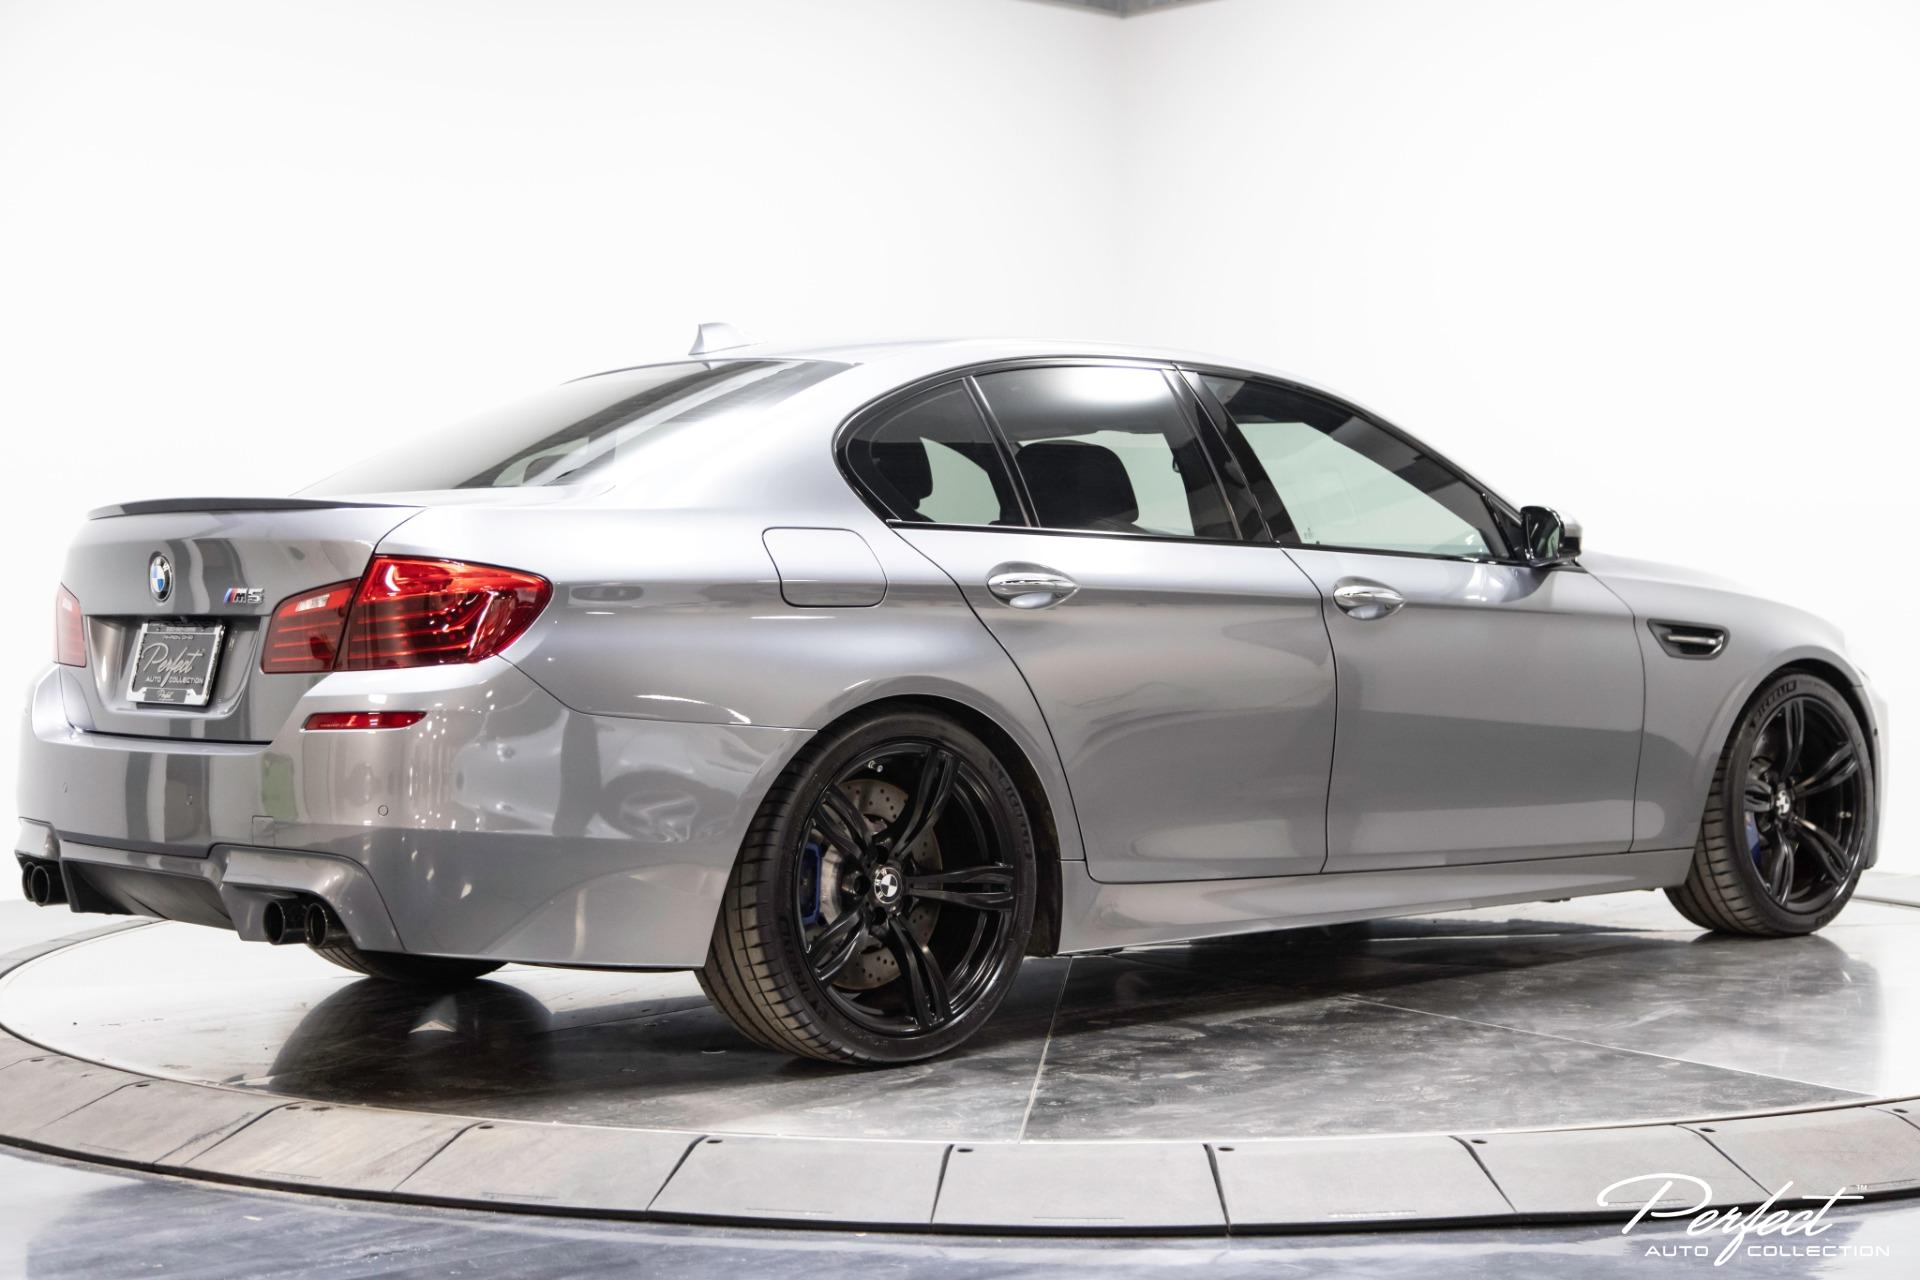 Used 2010 BMW M5 For Sale (Sold)  Momentum Motorcars Inc Stock